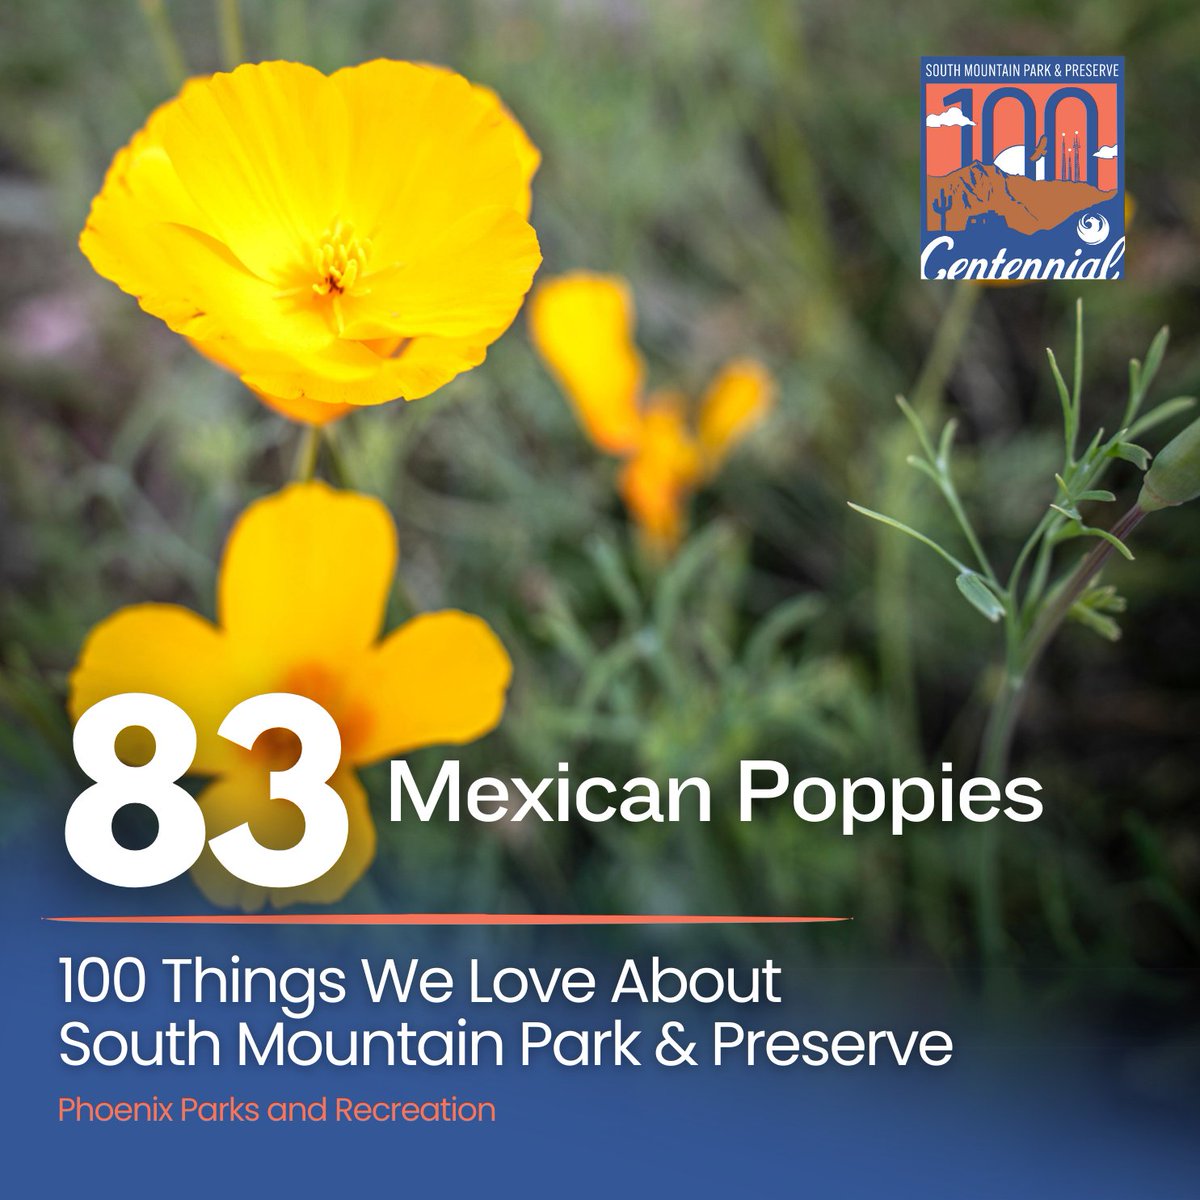 Meet the sun-loving Mexican poppies! These annual flowering plants bloom each spring, adding a pop of color to our desert terrain at South Mountain Park & Preserve. 🌼🌞🌿 #spring #flowers #southmountain100 #phxparks #phoenixparksandrecreation